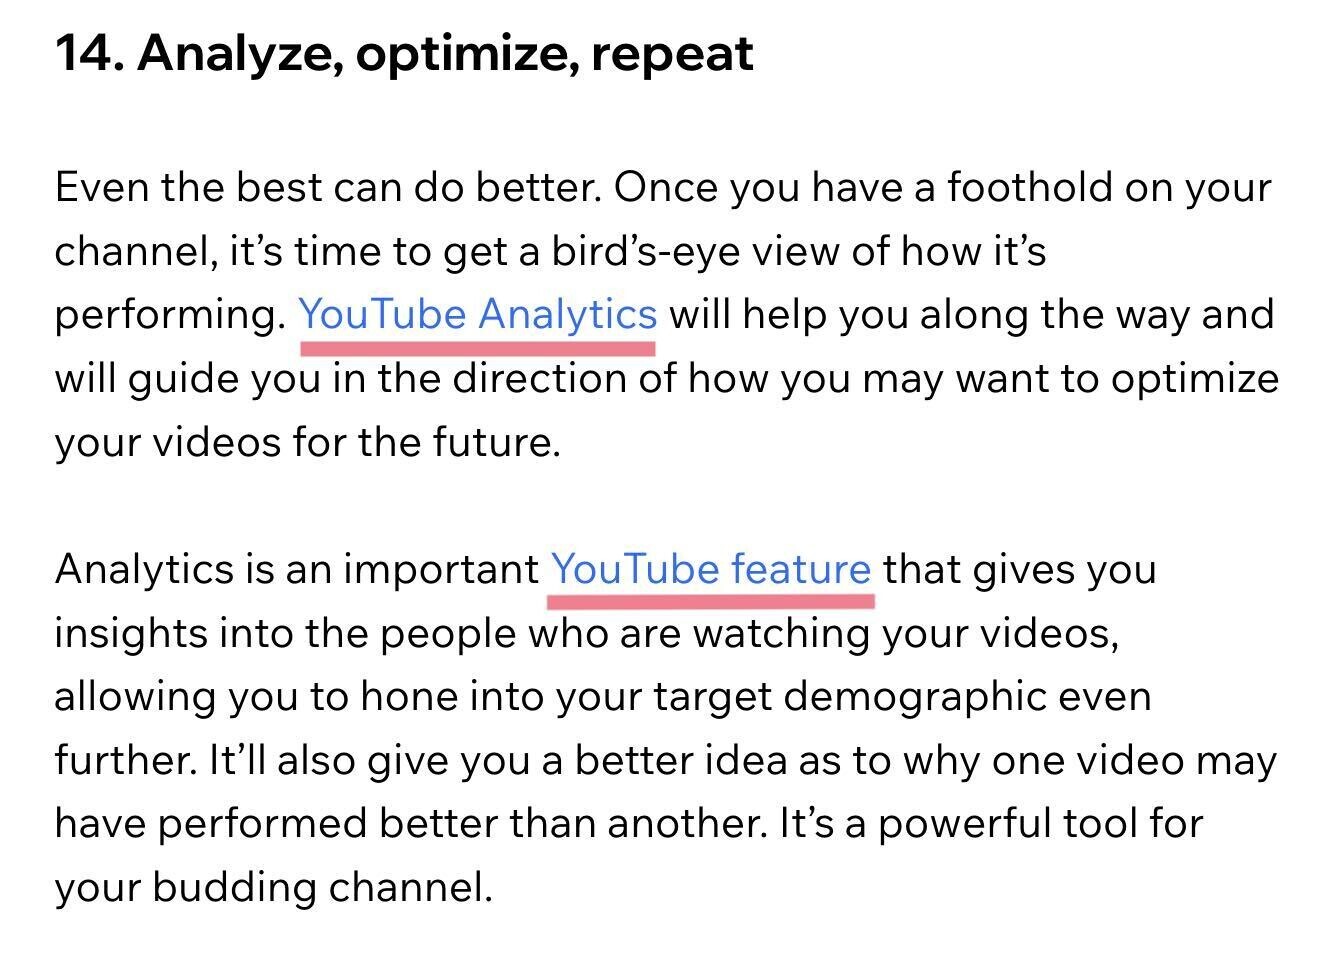 Wix guide on how to create a YouTube channel excerpt